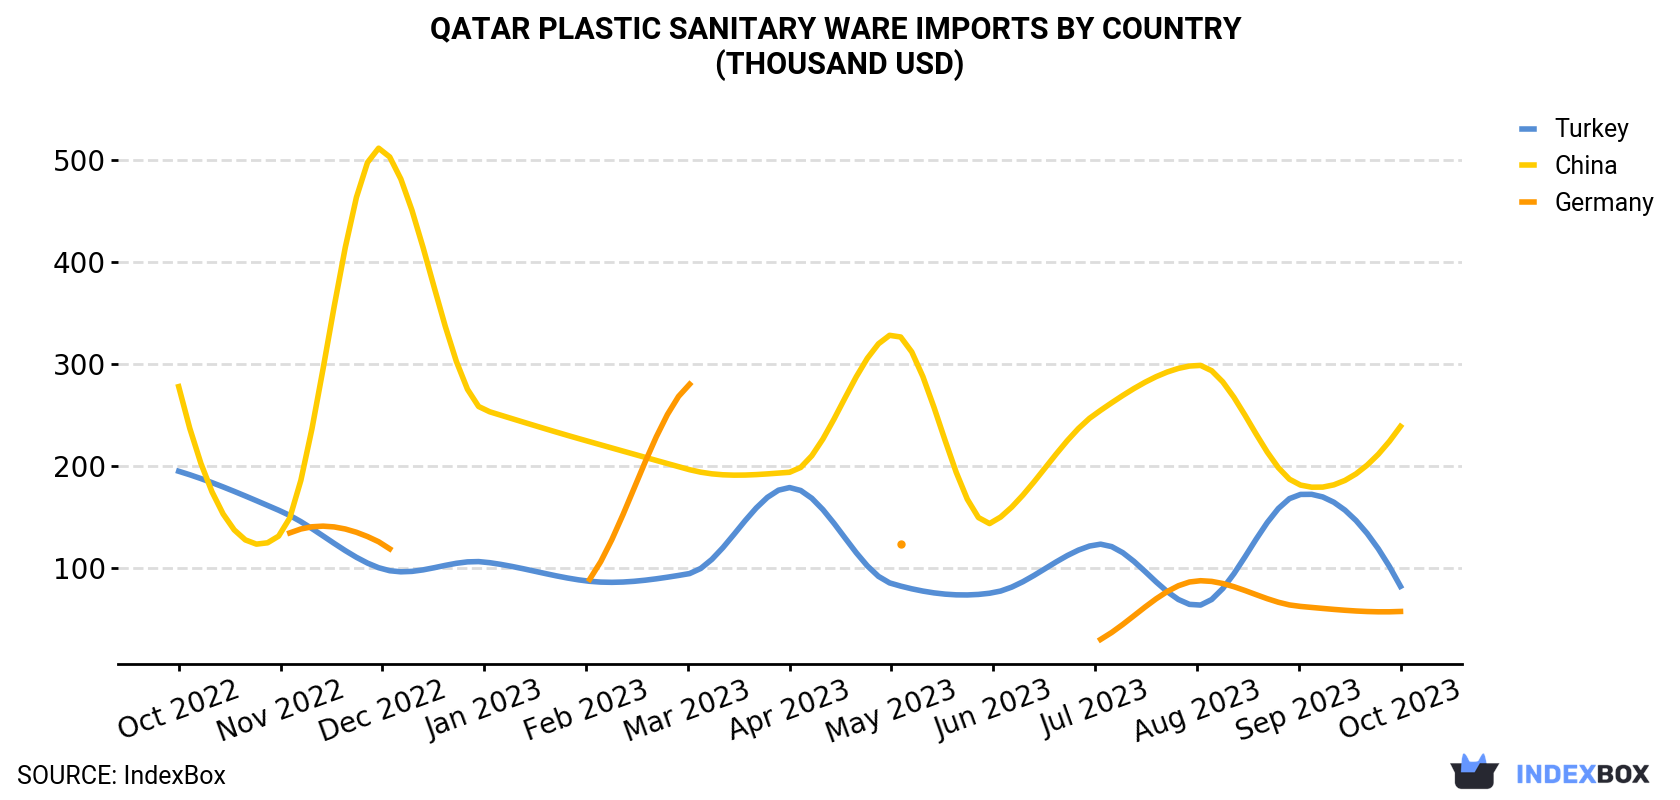 Qatar Plastic Sanitary Ware Imports By Country (Thousand USD)